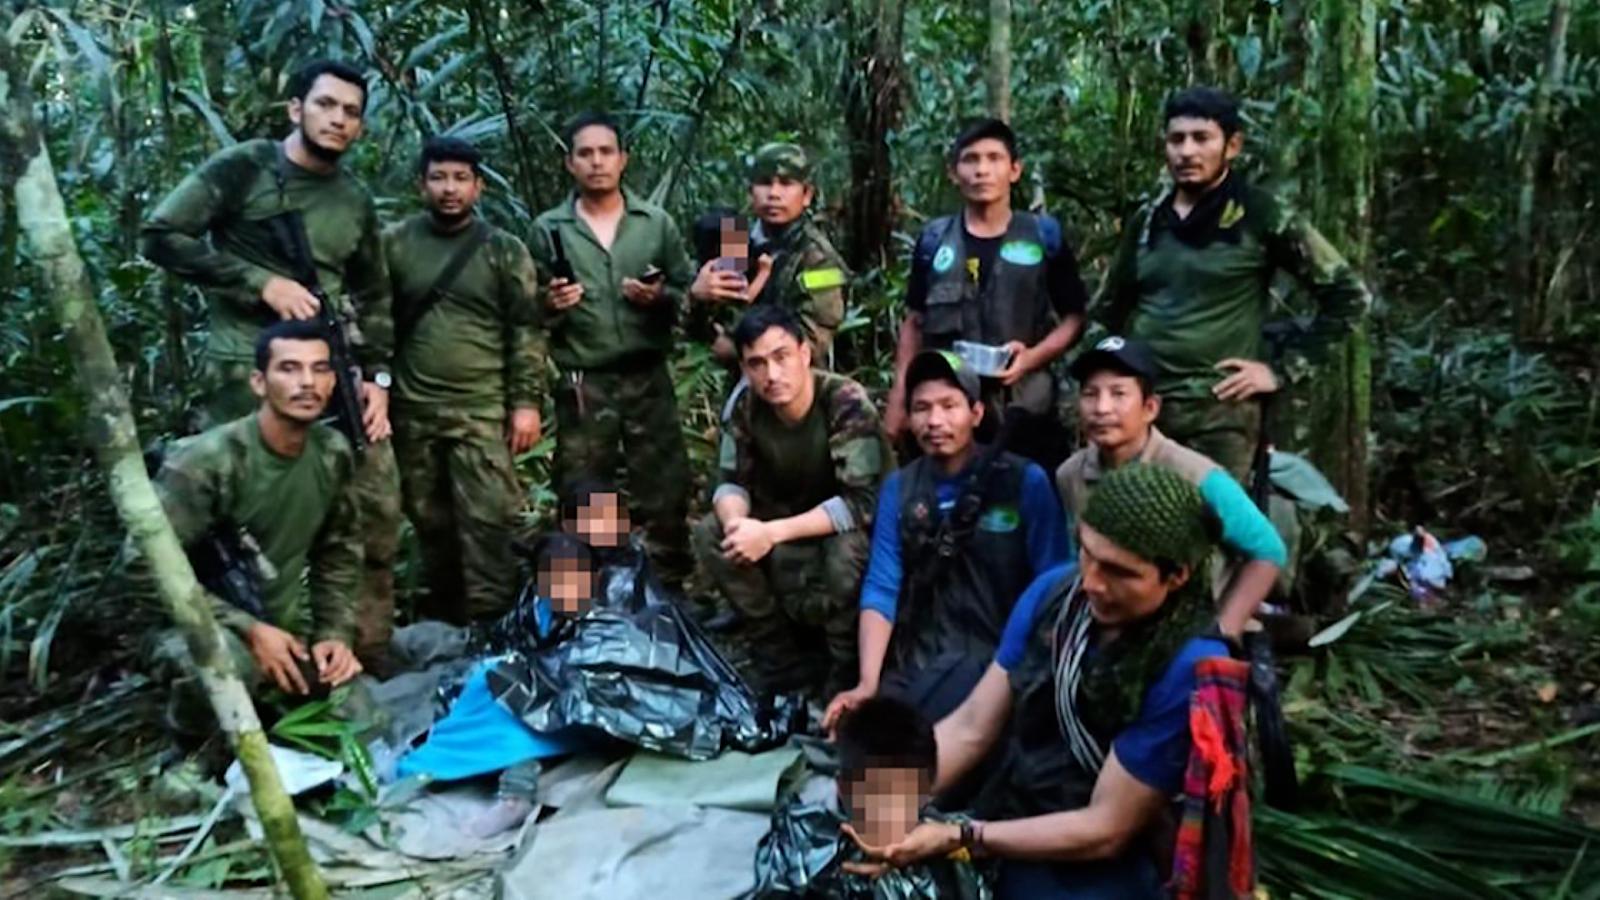 The Central Military Hospital reports that the children found in the Colombian jungle are doing well.